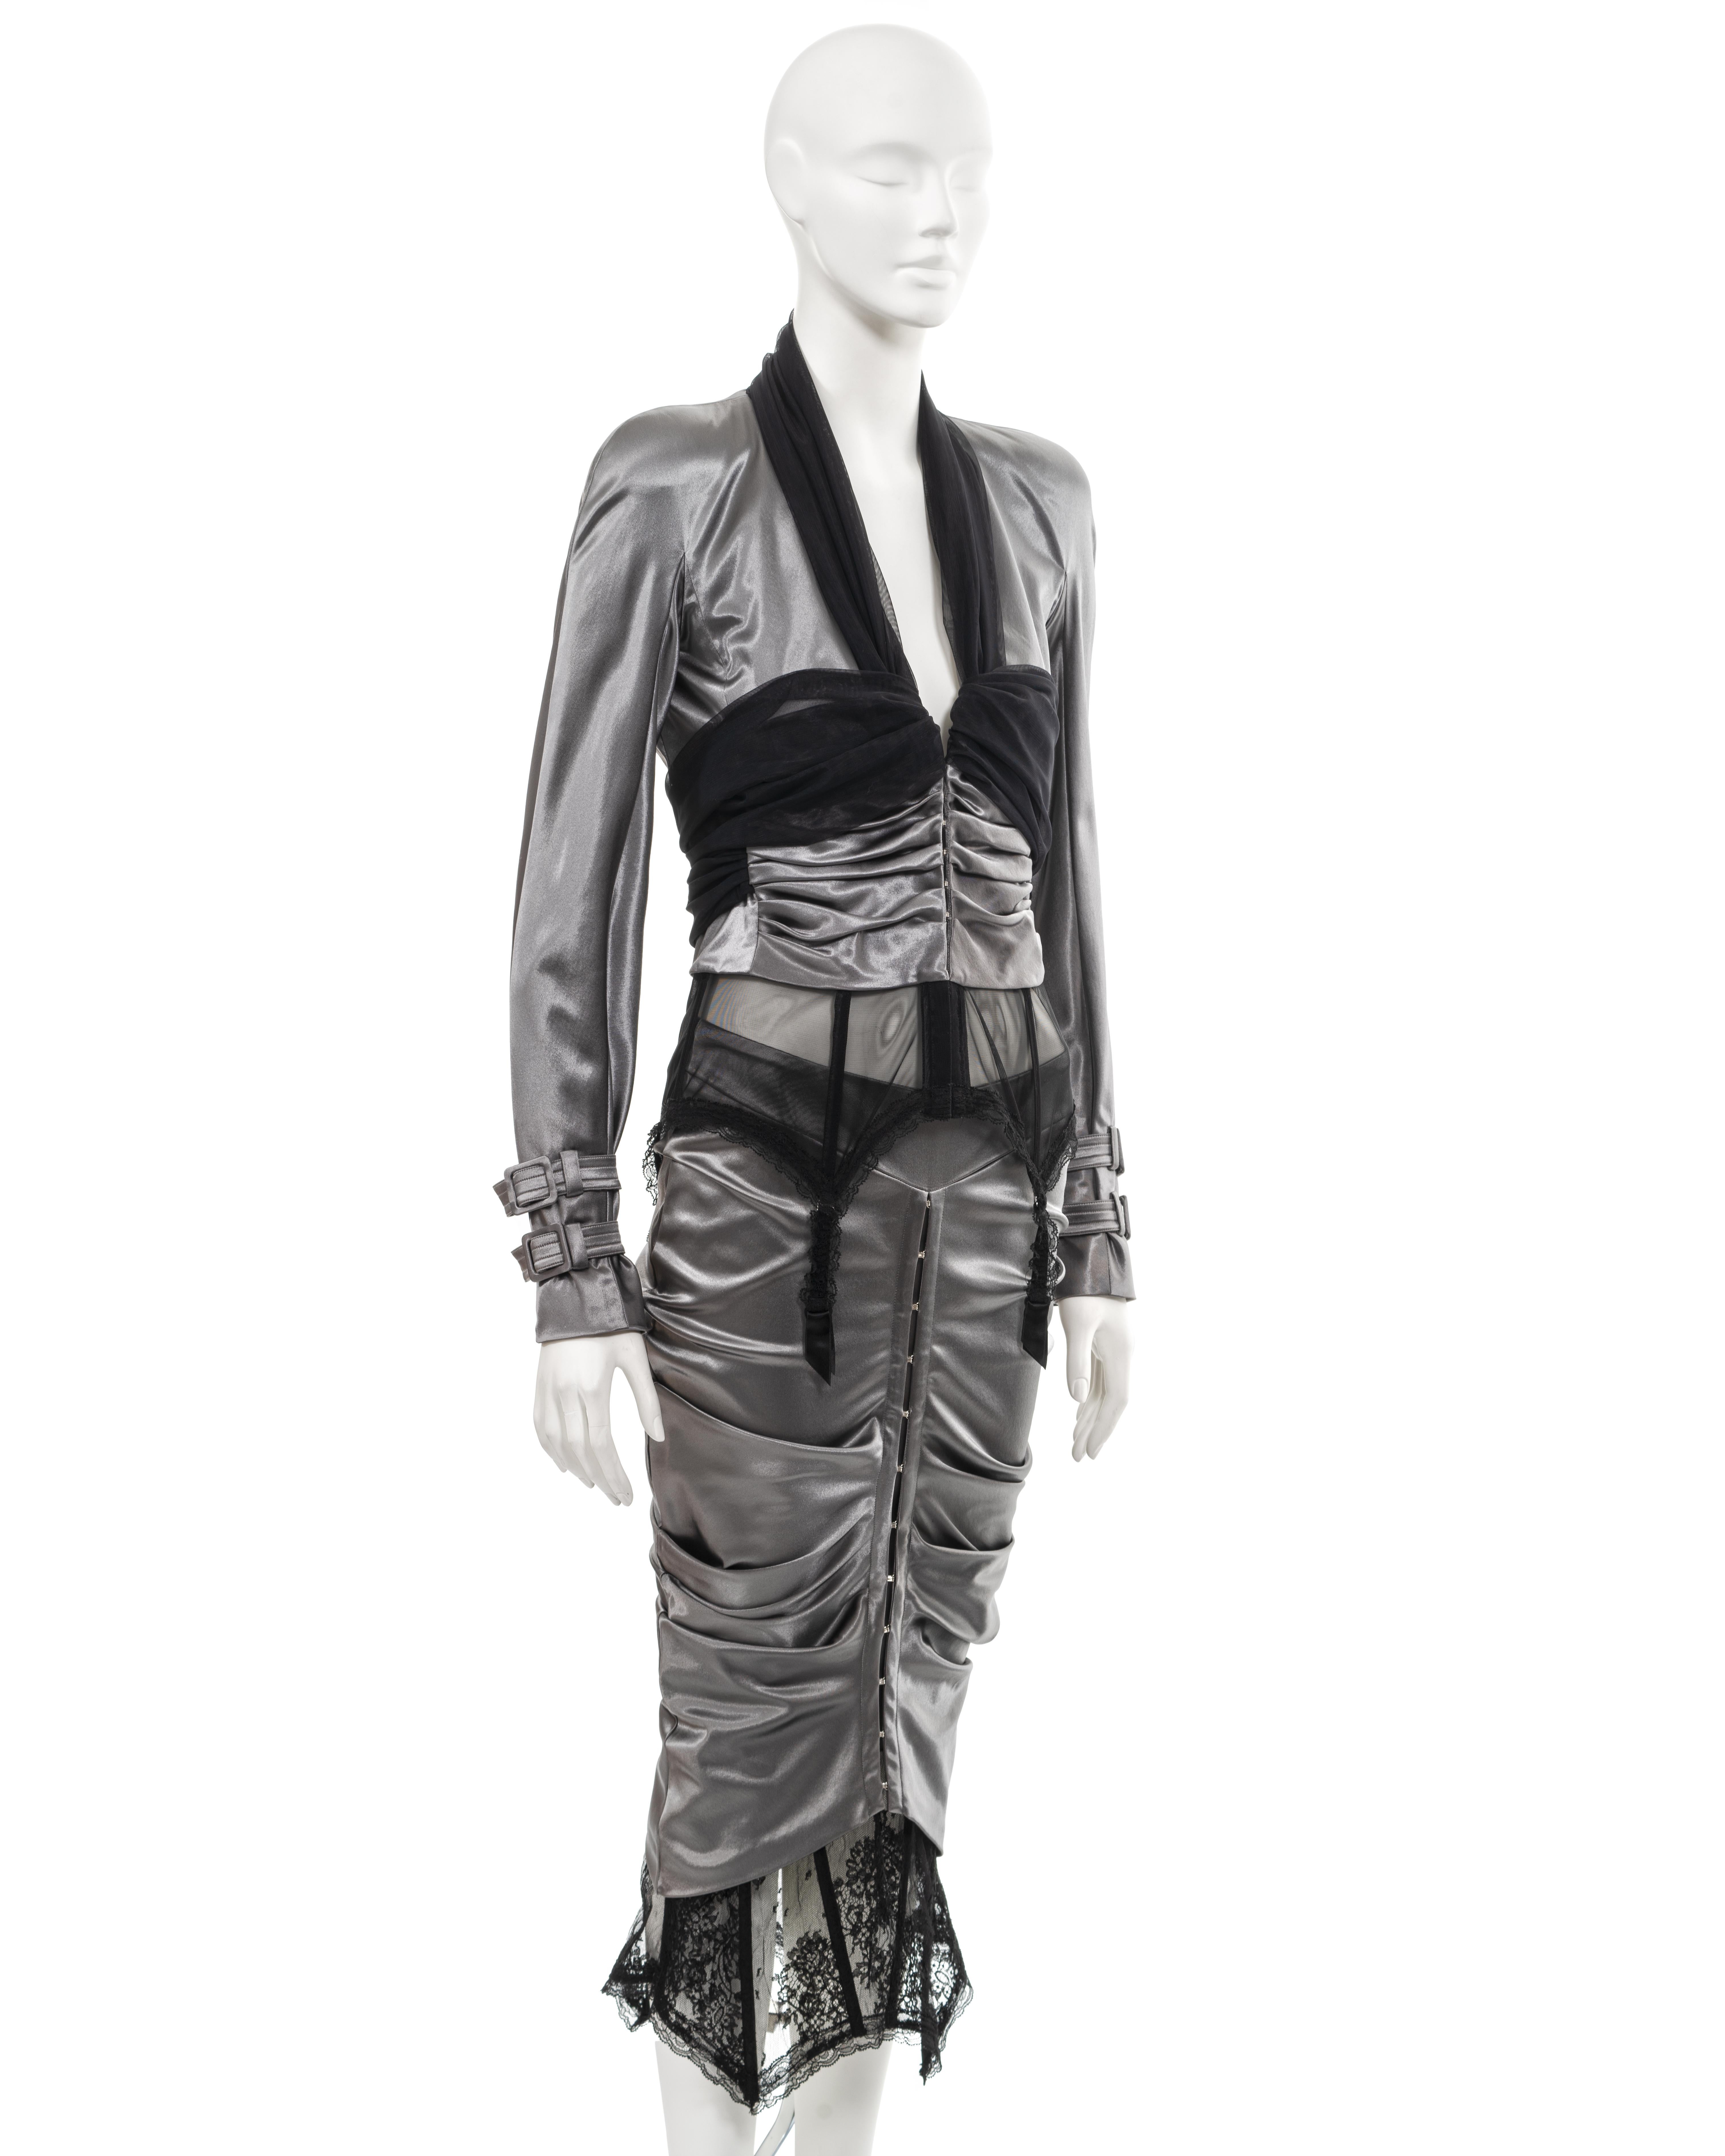 Christian Dior by John Galliano silver-grey stretch satin skirt suit, ss 2004 4